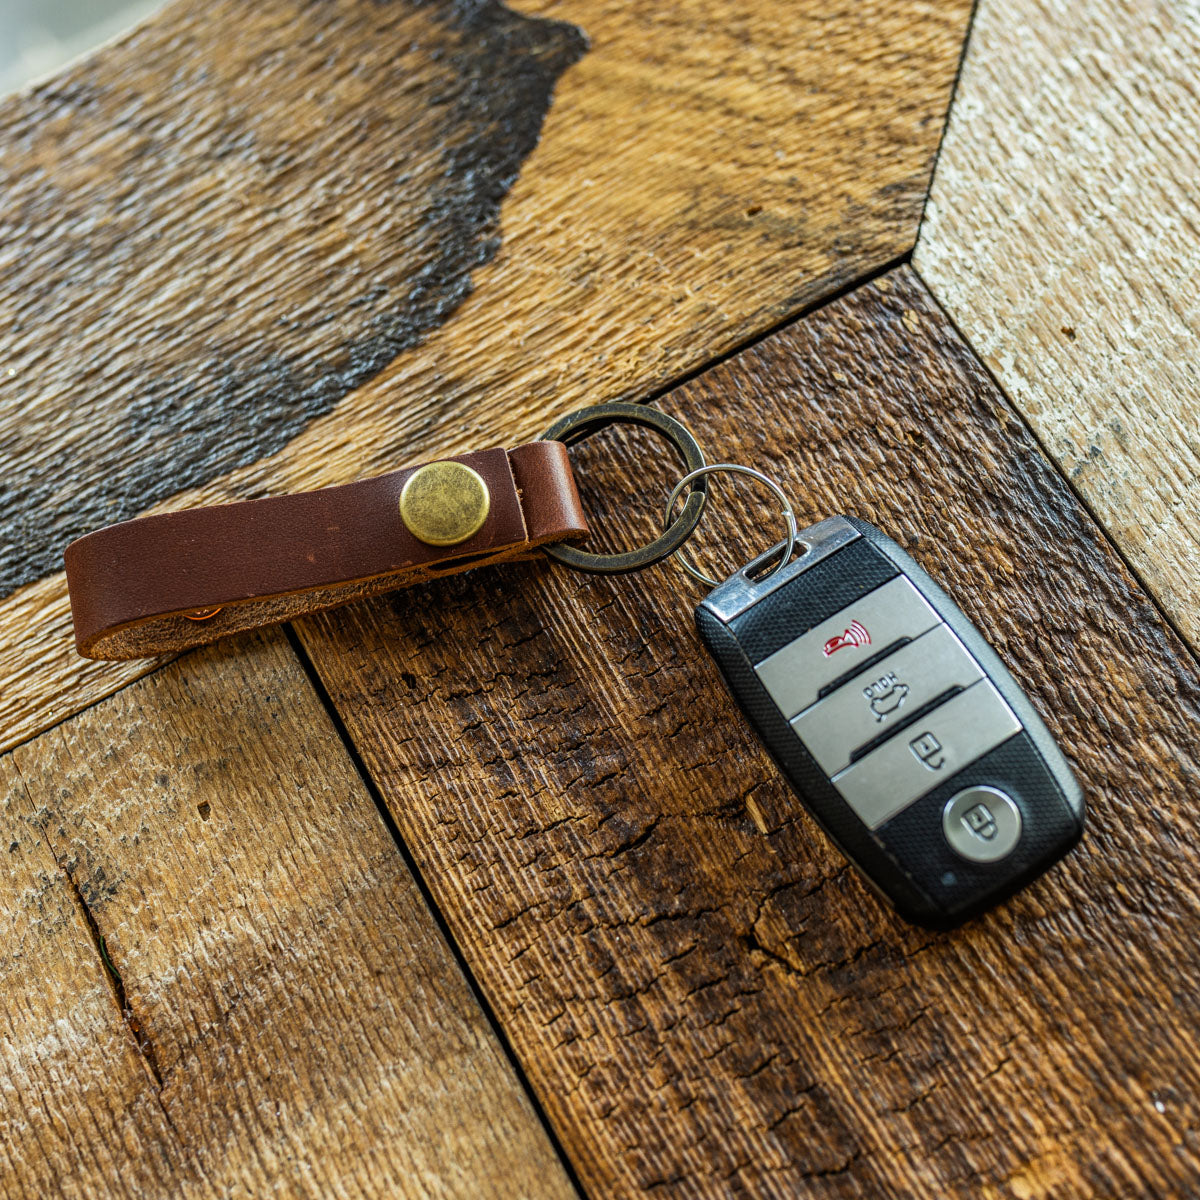 Simple Leather Key Ring